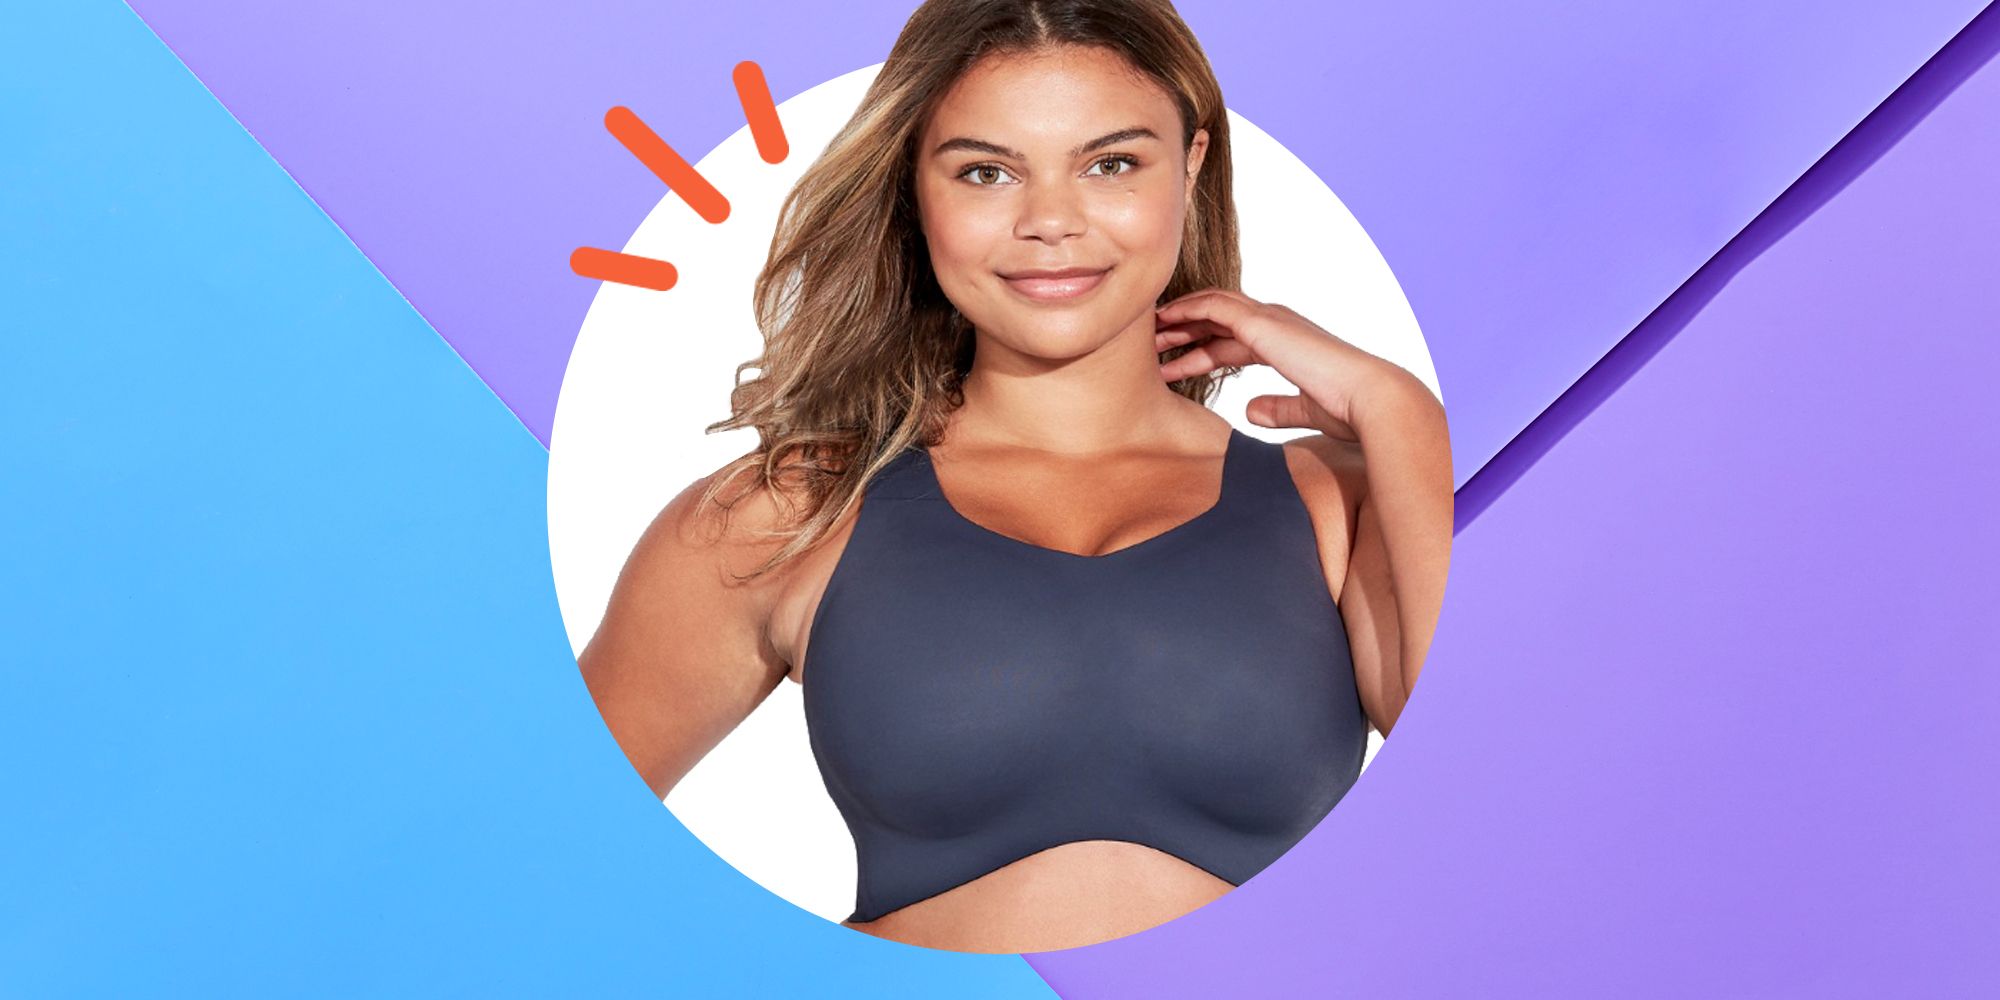 11 Best Sports Bras for Women With Big Boobs pic